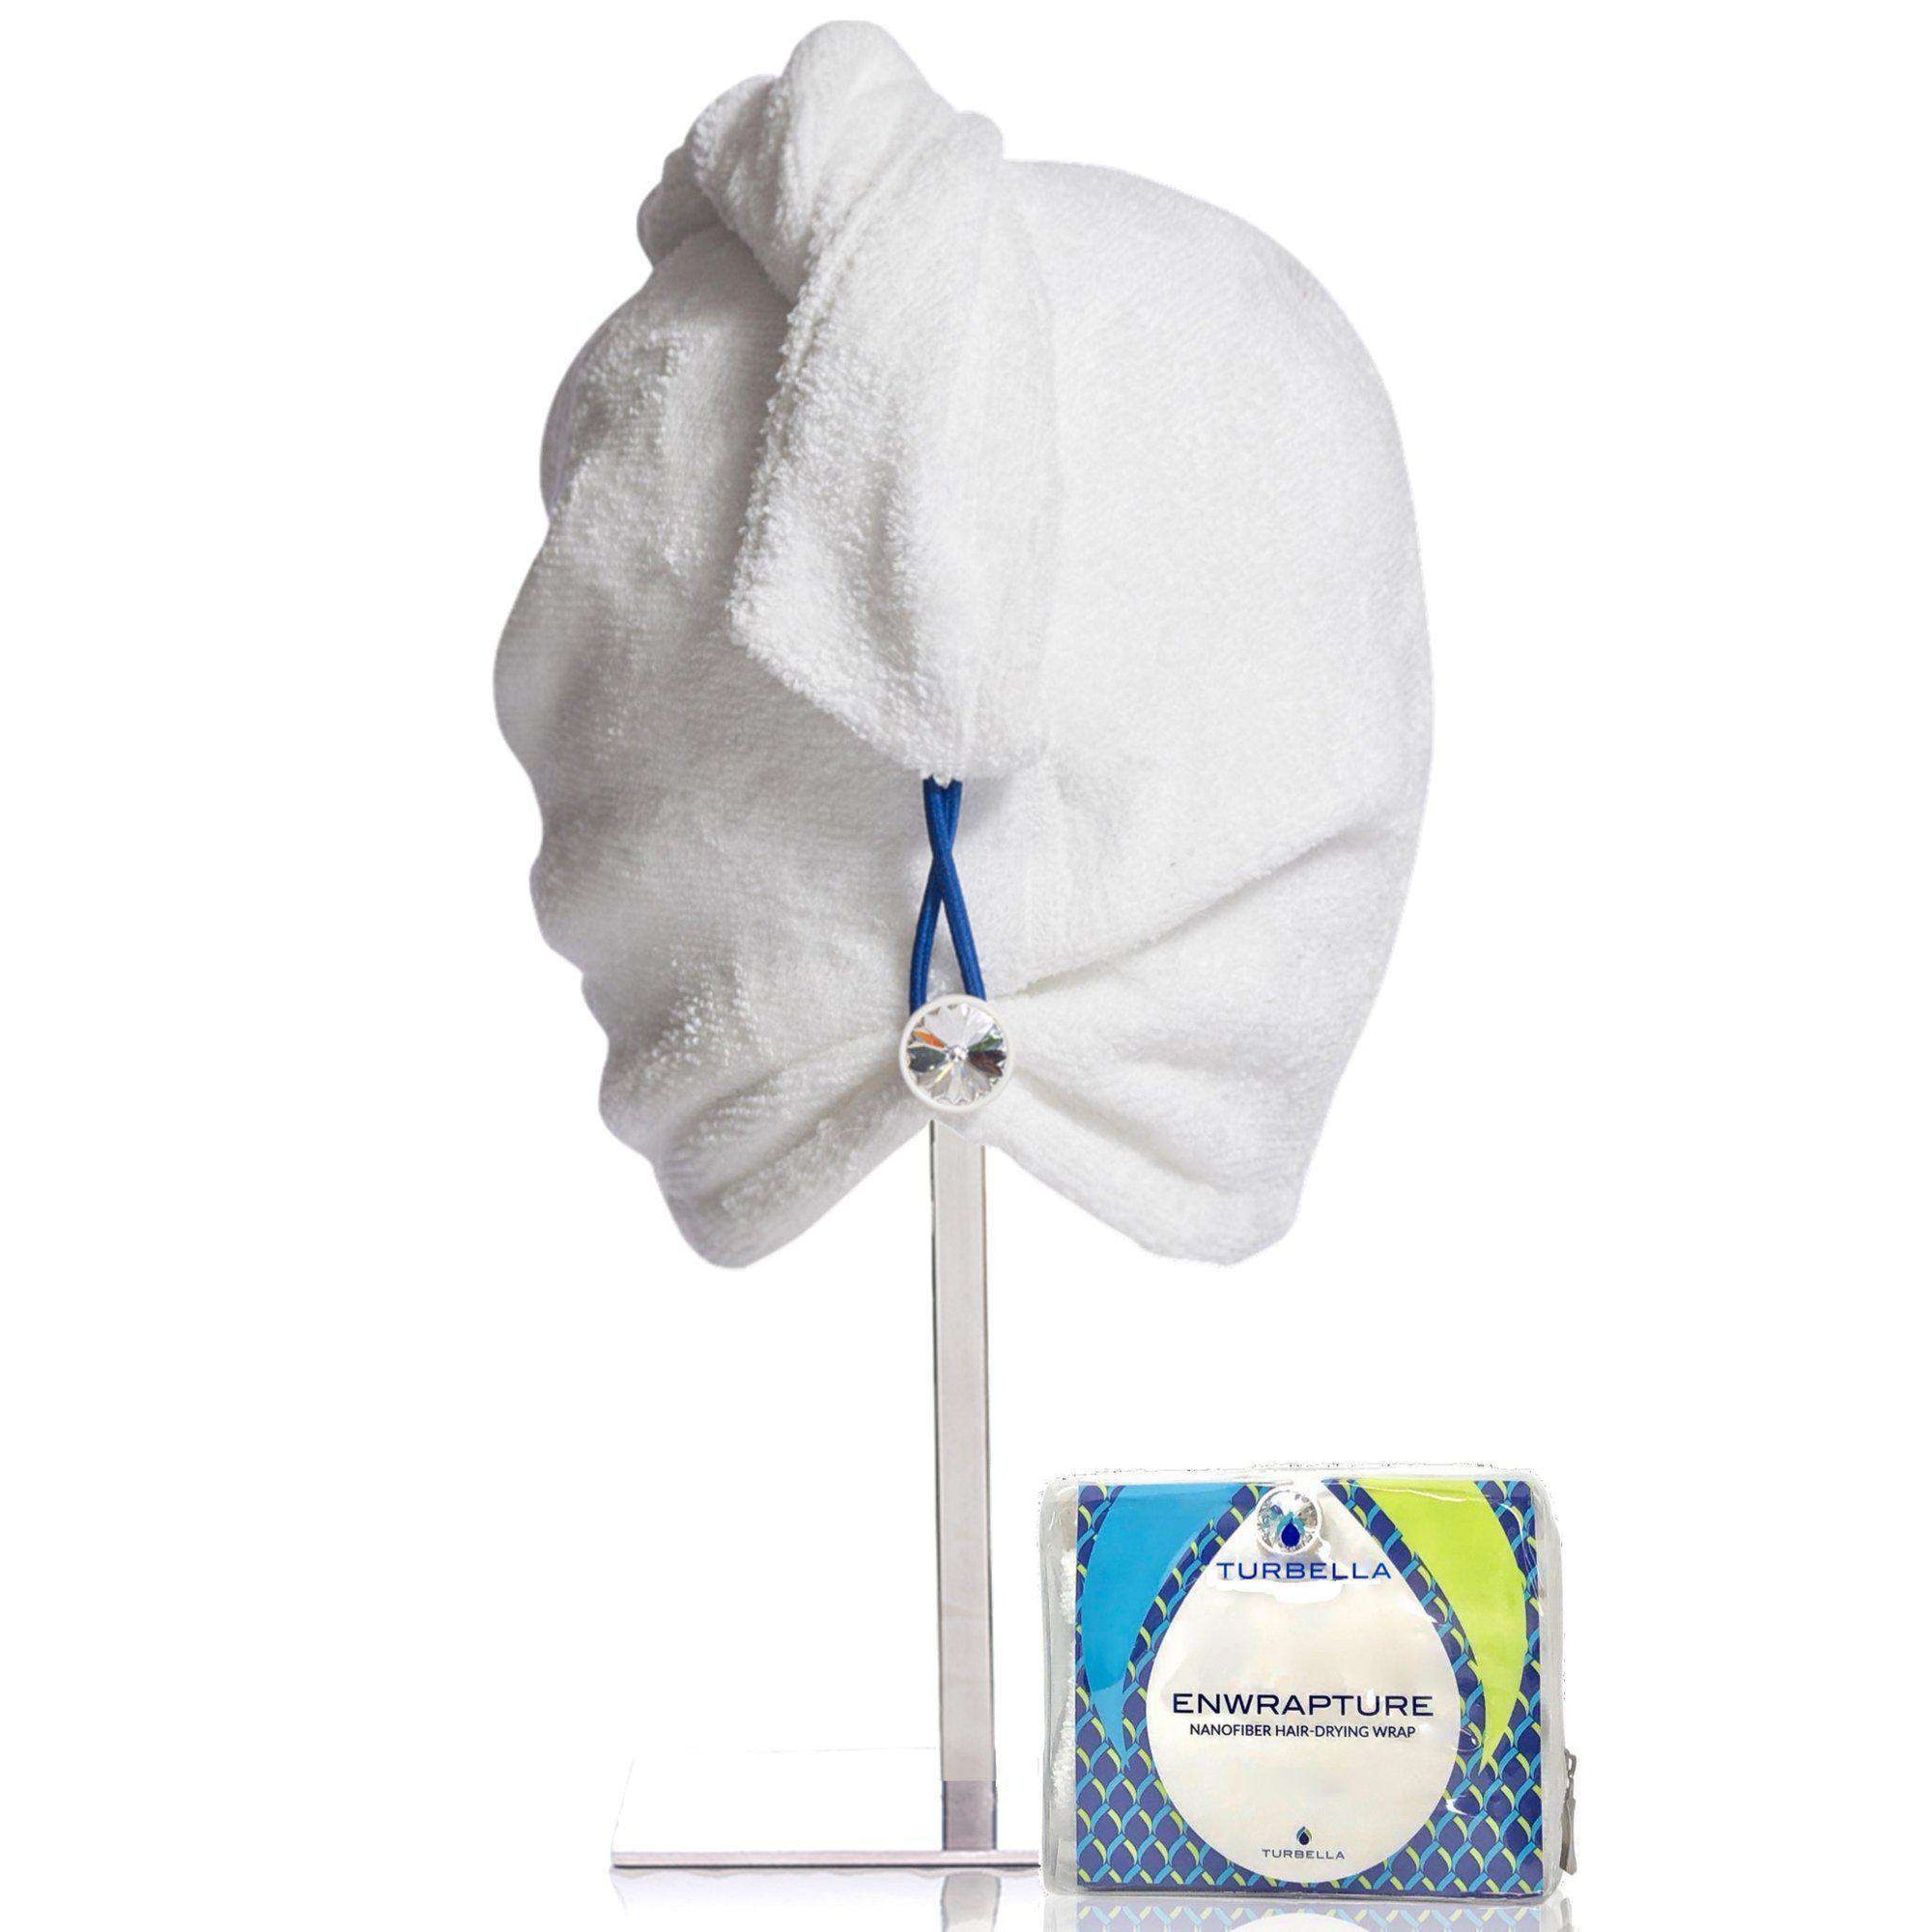 best hair towel turban twist to dry wet hair better than microfiber wrap Enwrapture with Swarovski button made in USA 